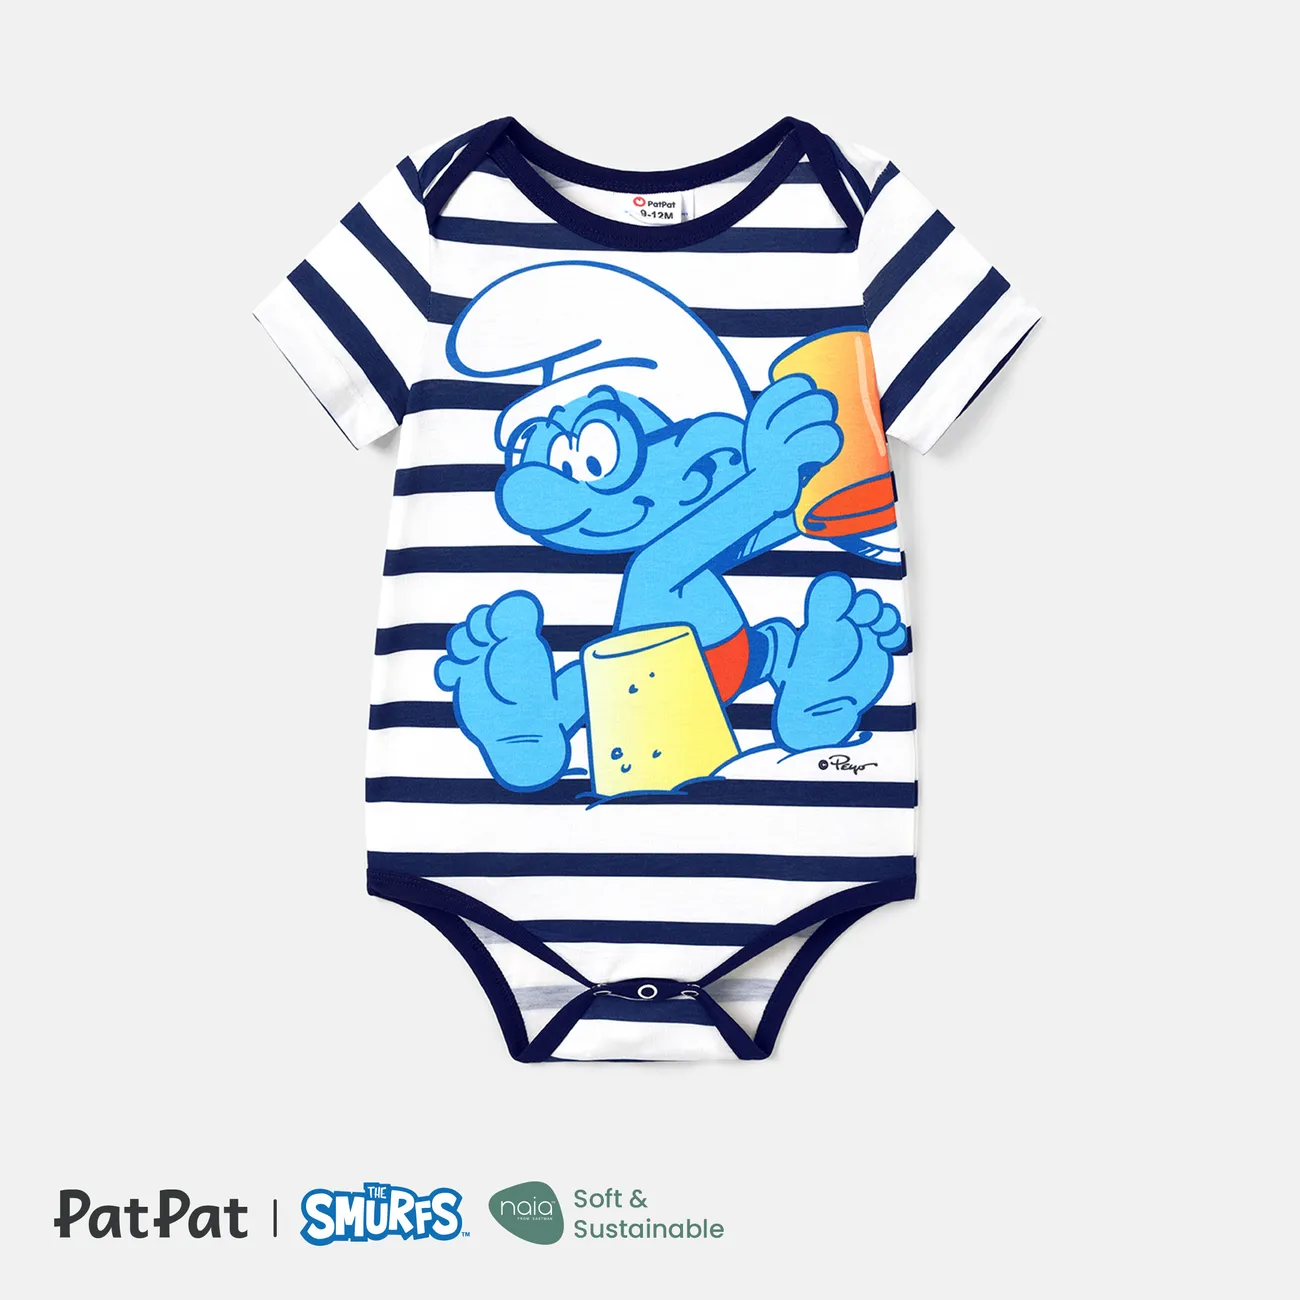 The Smurfs Family Matching Naia™ Character & Stripe Print Short-sleeve Dresses and T-shirts Sets COLOREDSTRIPES big image 1